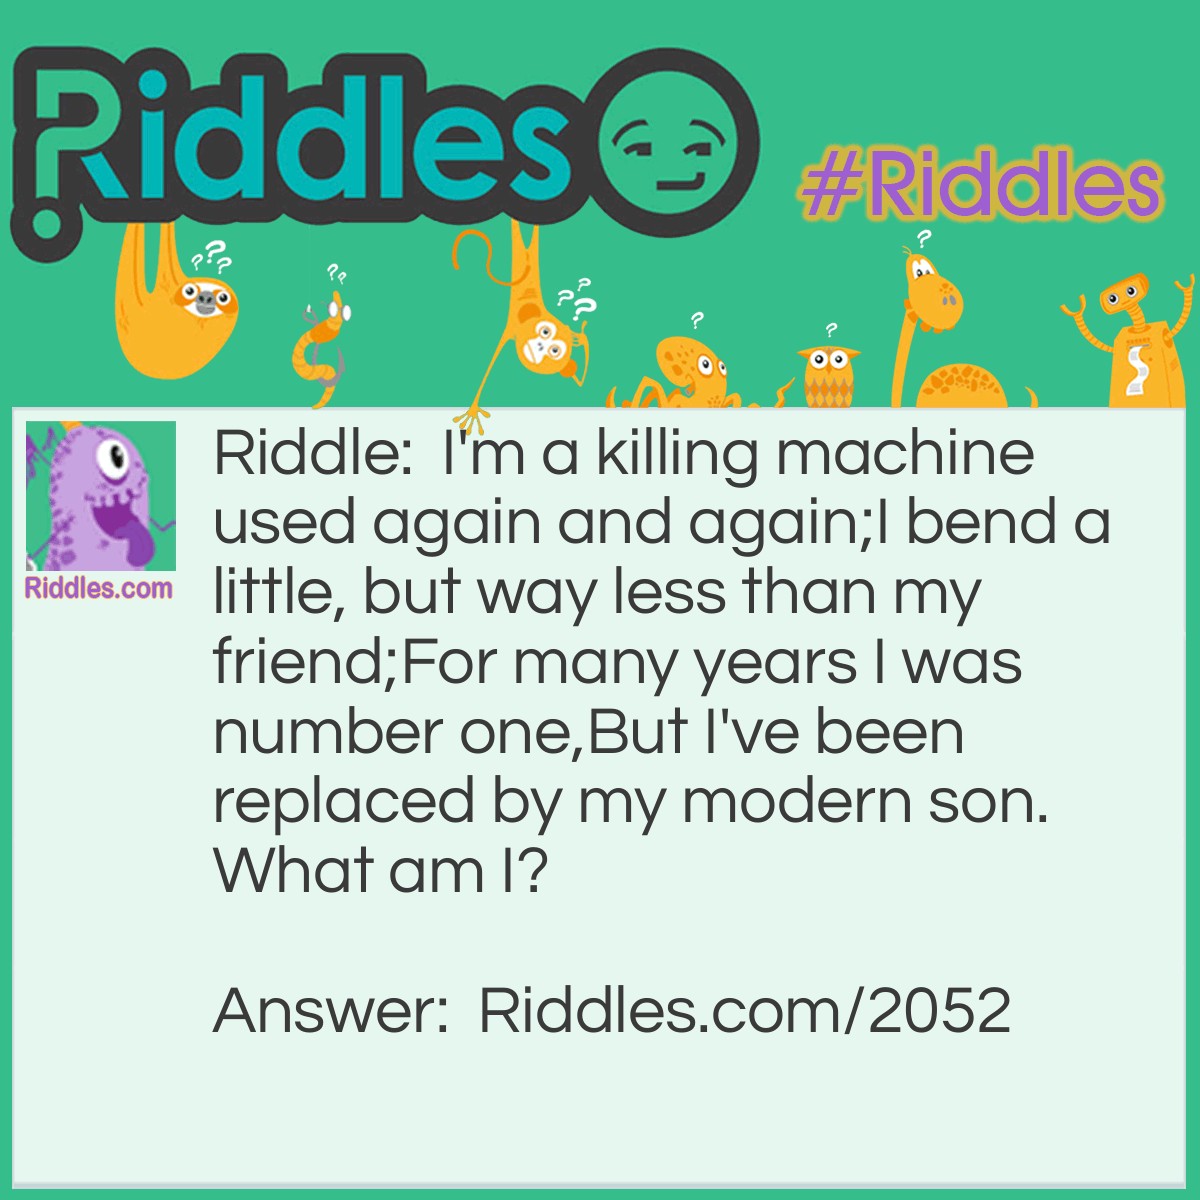 Riddle: I'm a killing machine used again and again;
I bend a little, but way less than my friend;
For many years I was number one,
But I've been replaced by my modern son.
What am I? Answer: Arrow